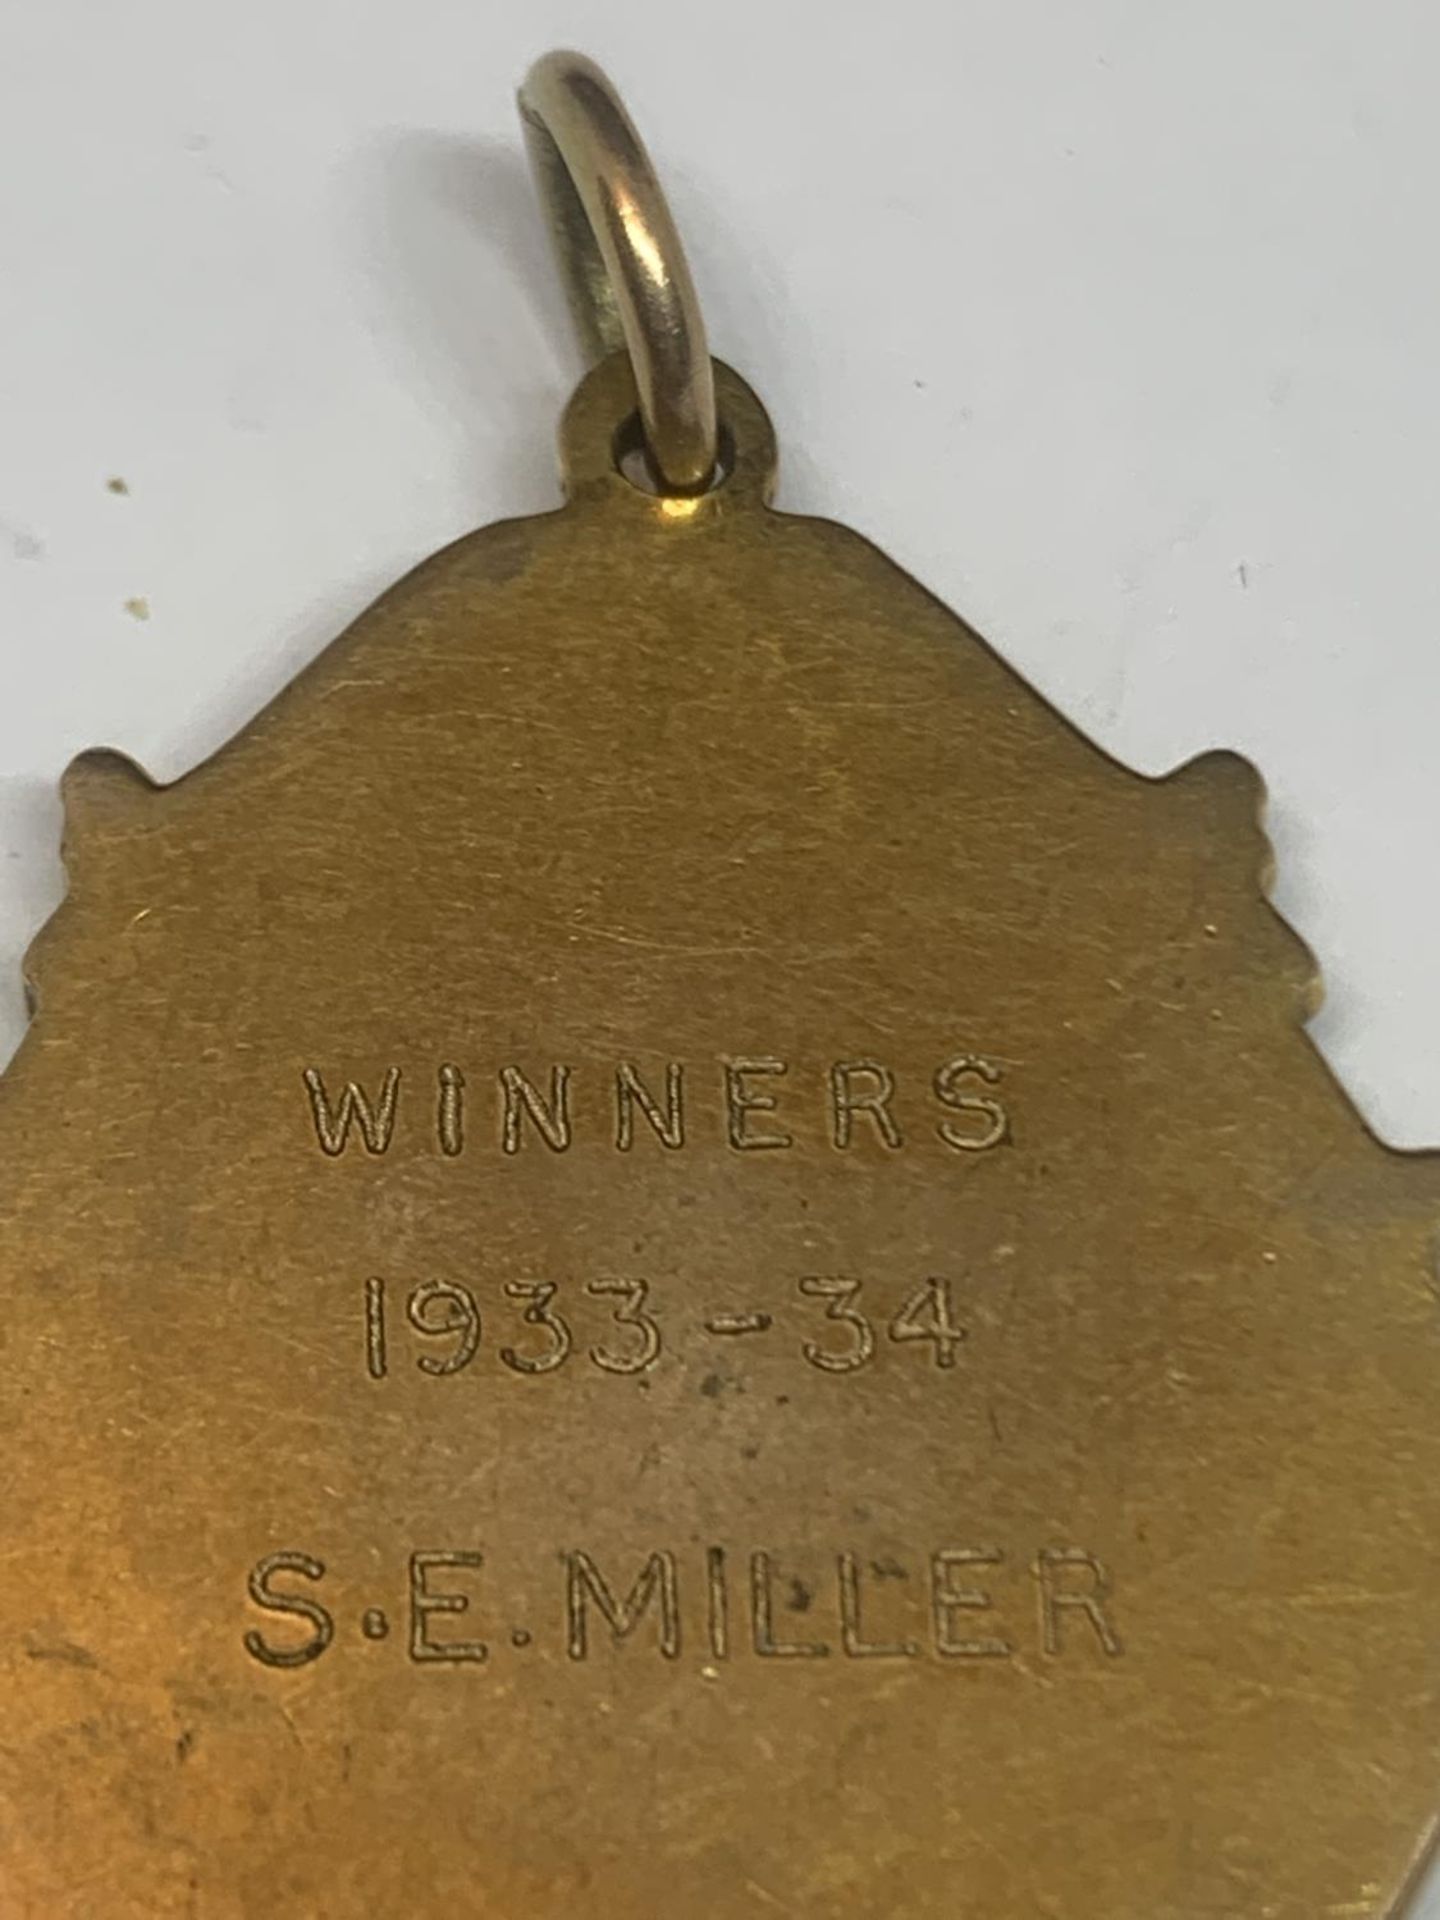 A HALLMARKED 9 CARAT GOLD LANCASHIRE RUGBY LEAGUE MEDAL ENGRAVED WINNERS 1933-34 S. E. MILLER - Image 3 of 5